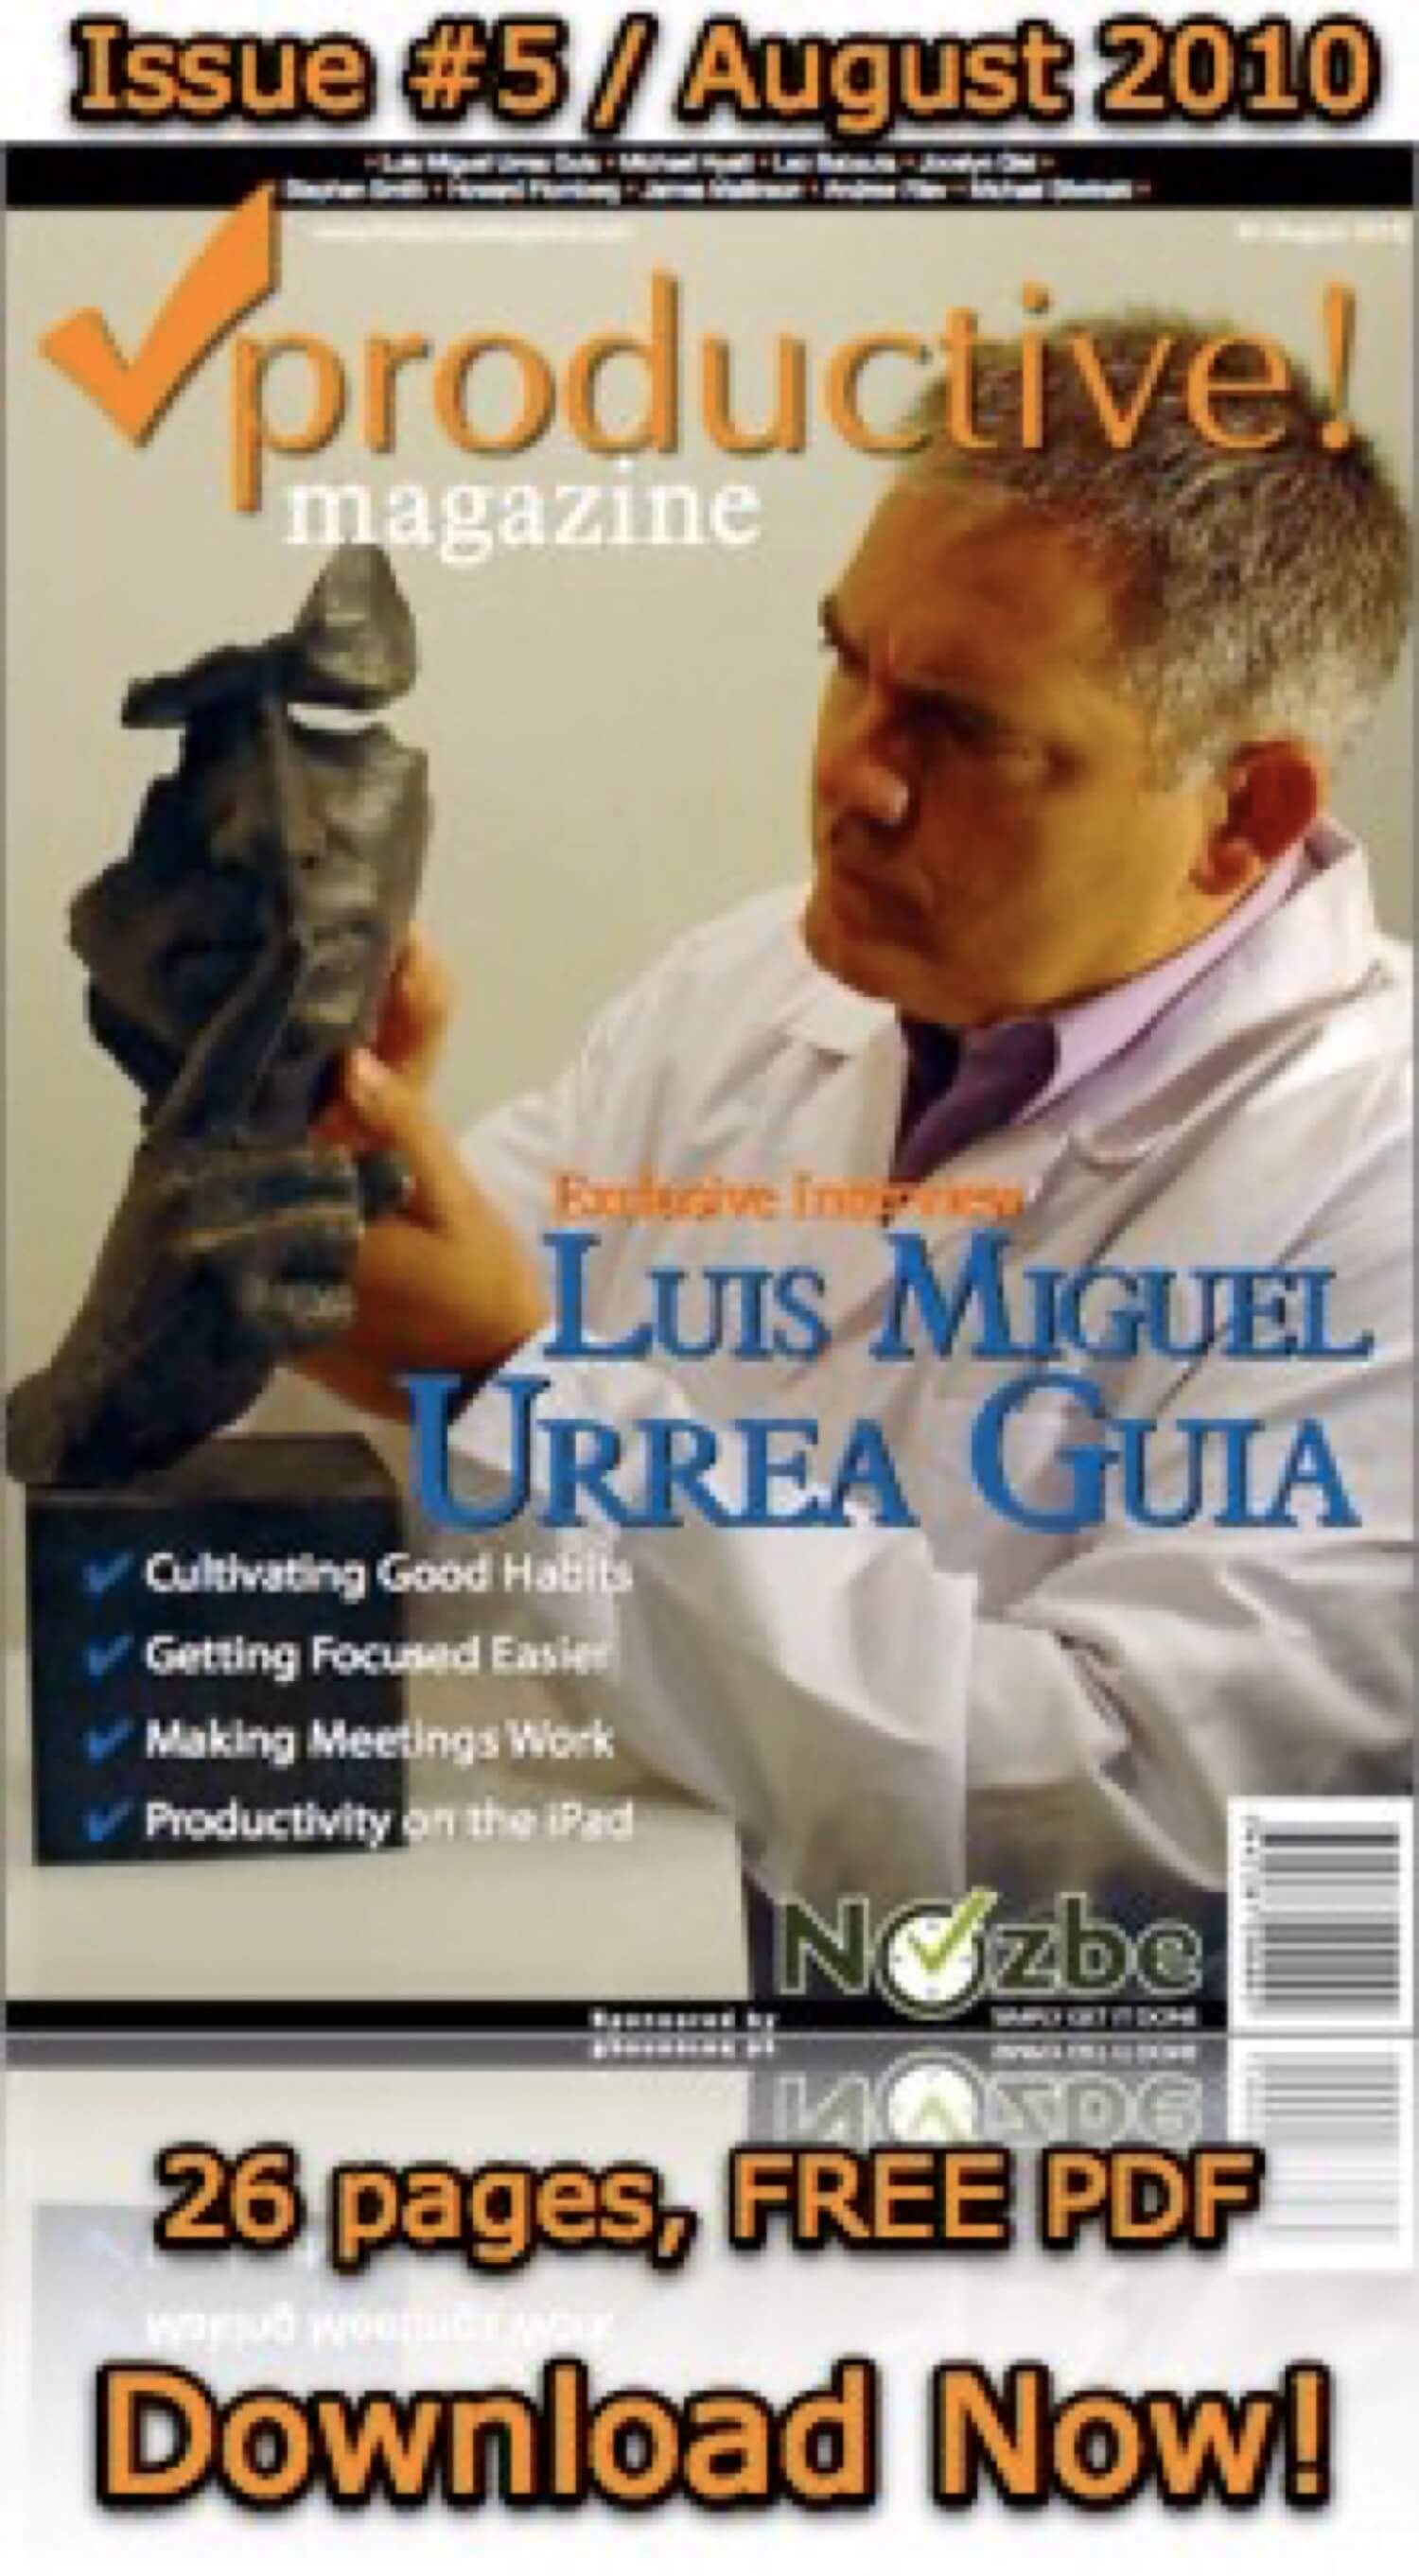 Productive Magazine #5 available! Miguel Guía interview about art, passion, habits and more!